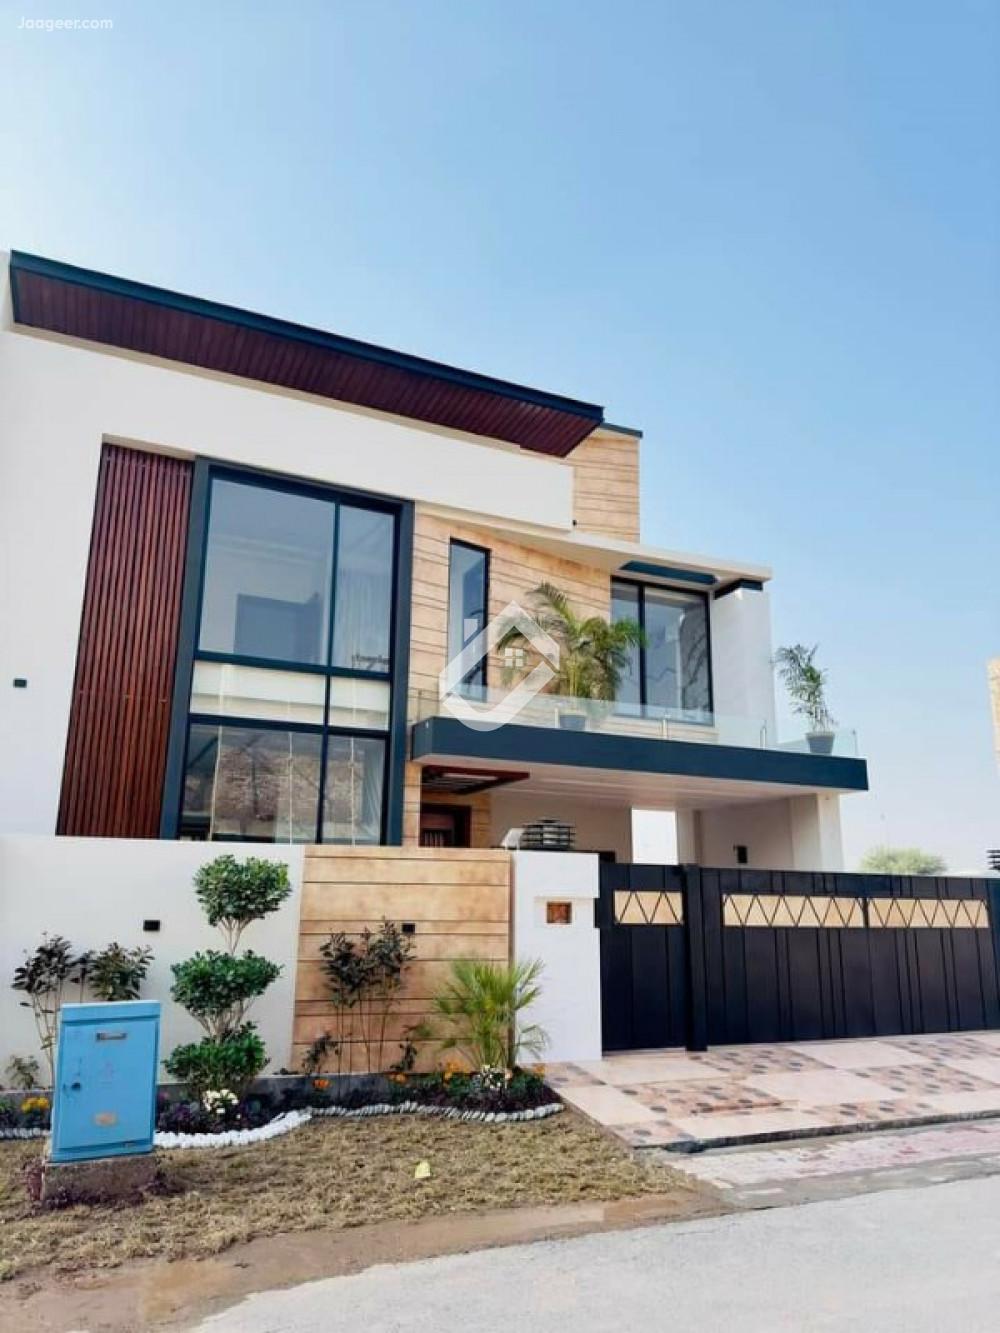 View  12 Marla Double Storey House For Sale In Royal Orchard in Royal Orchard, Multan